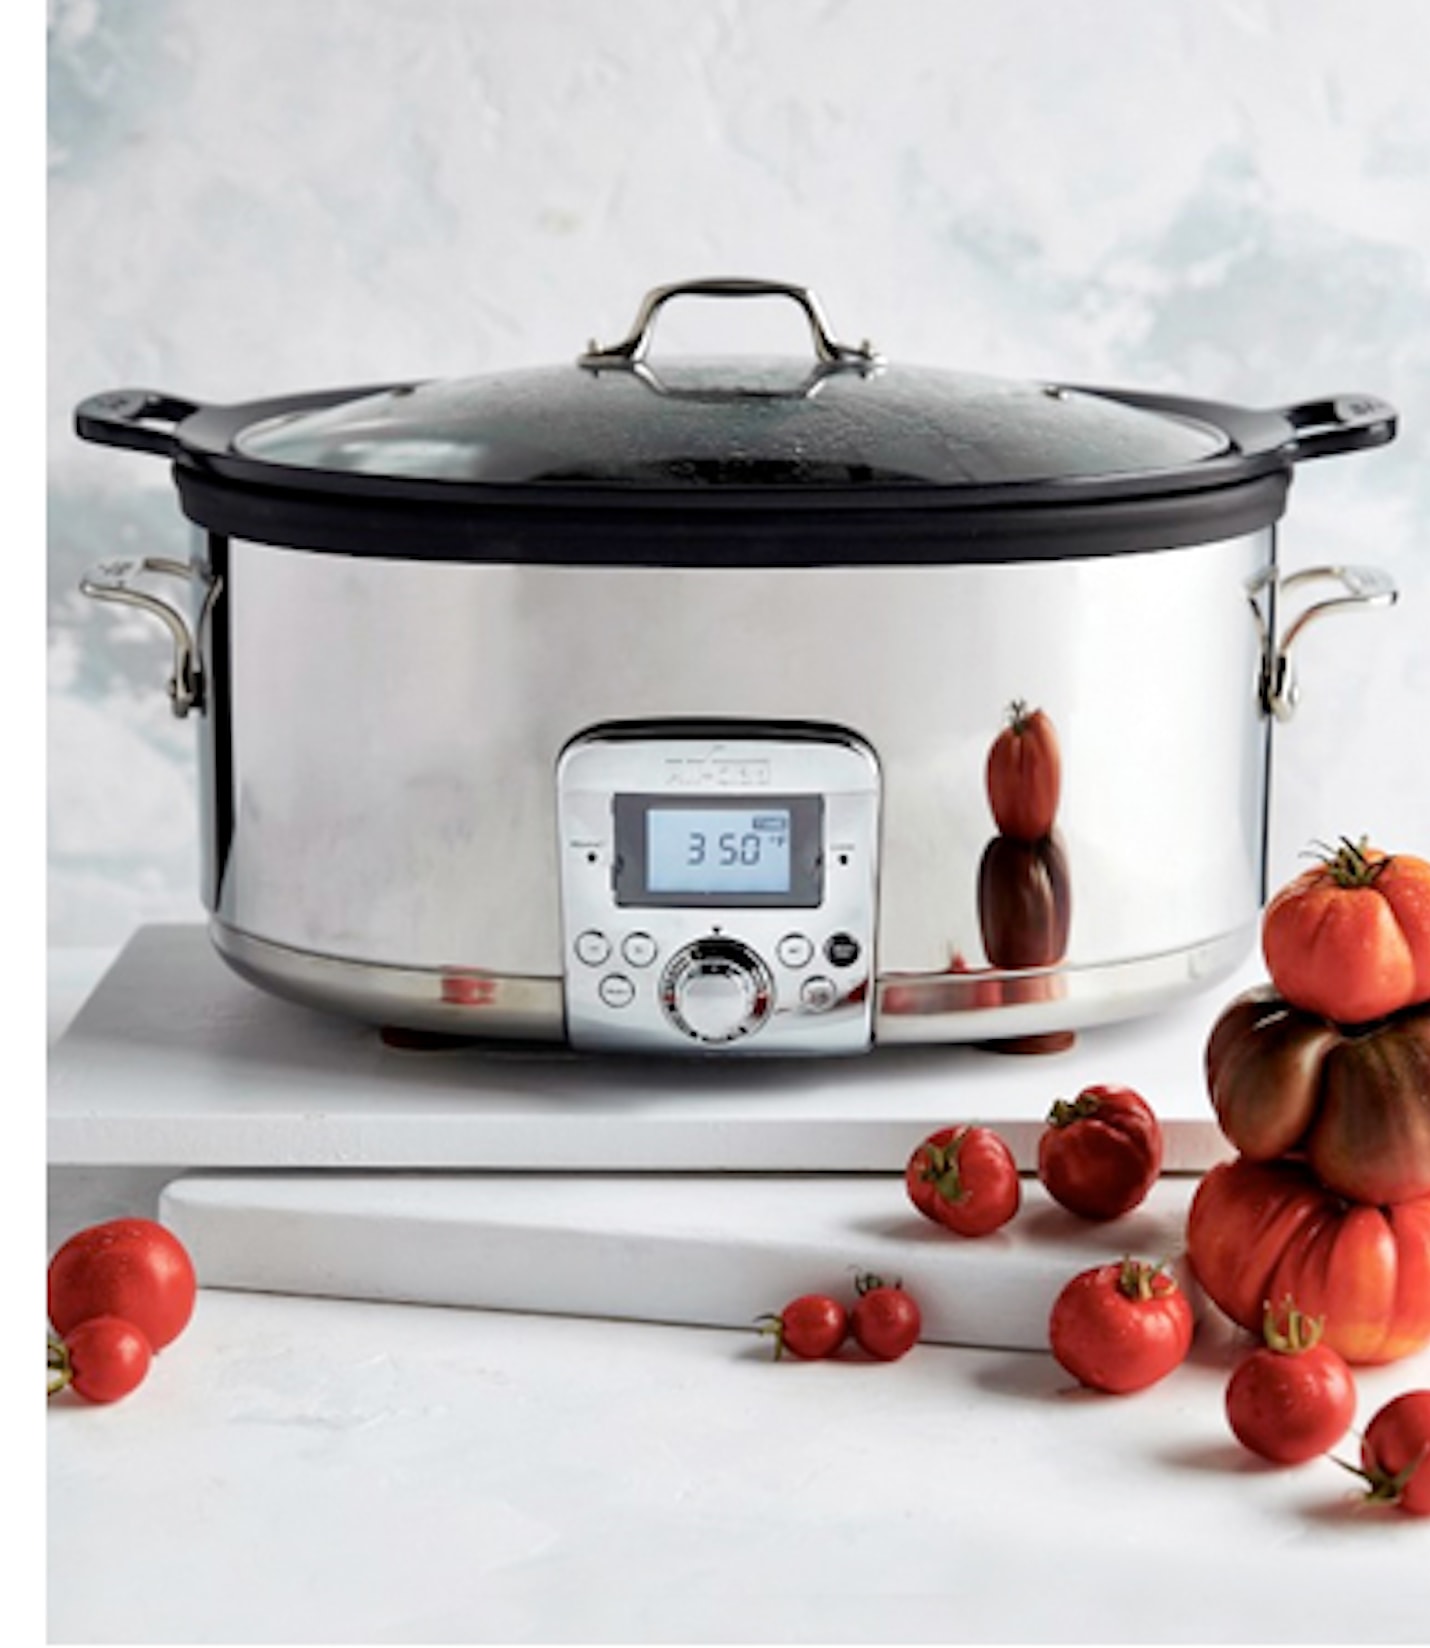 All-Clad Cast-Iron Dutch Oven Slow Cooker